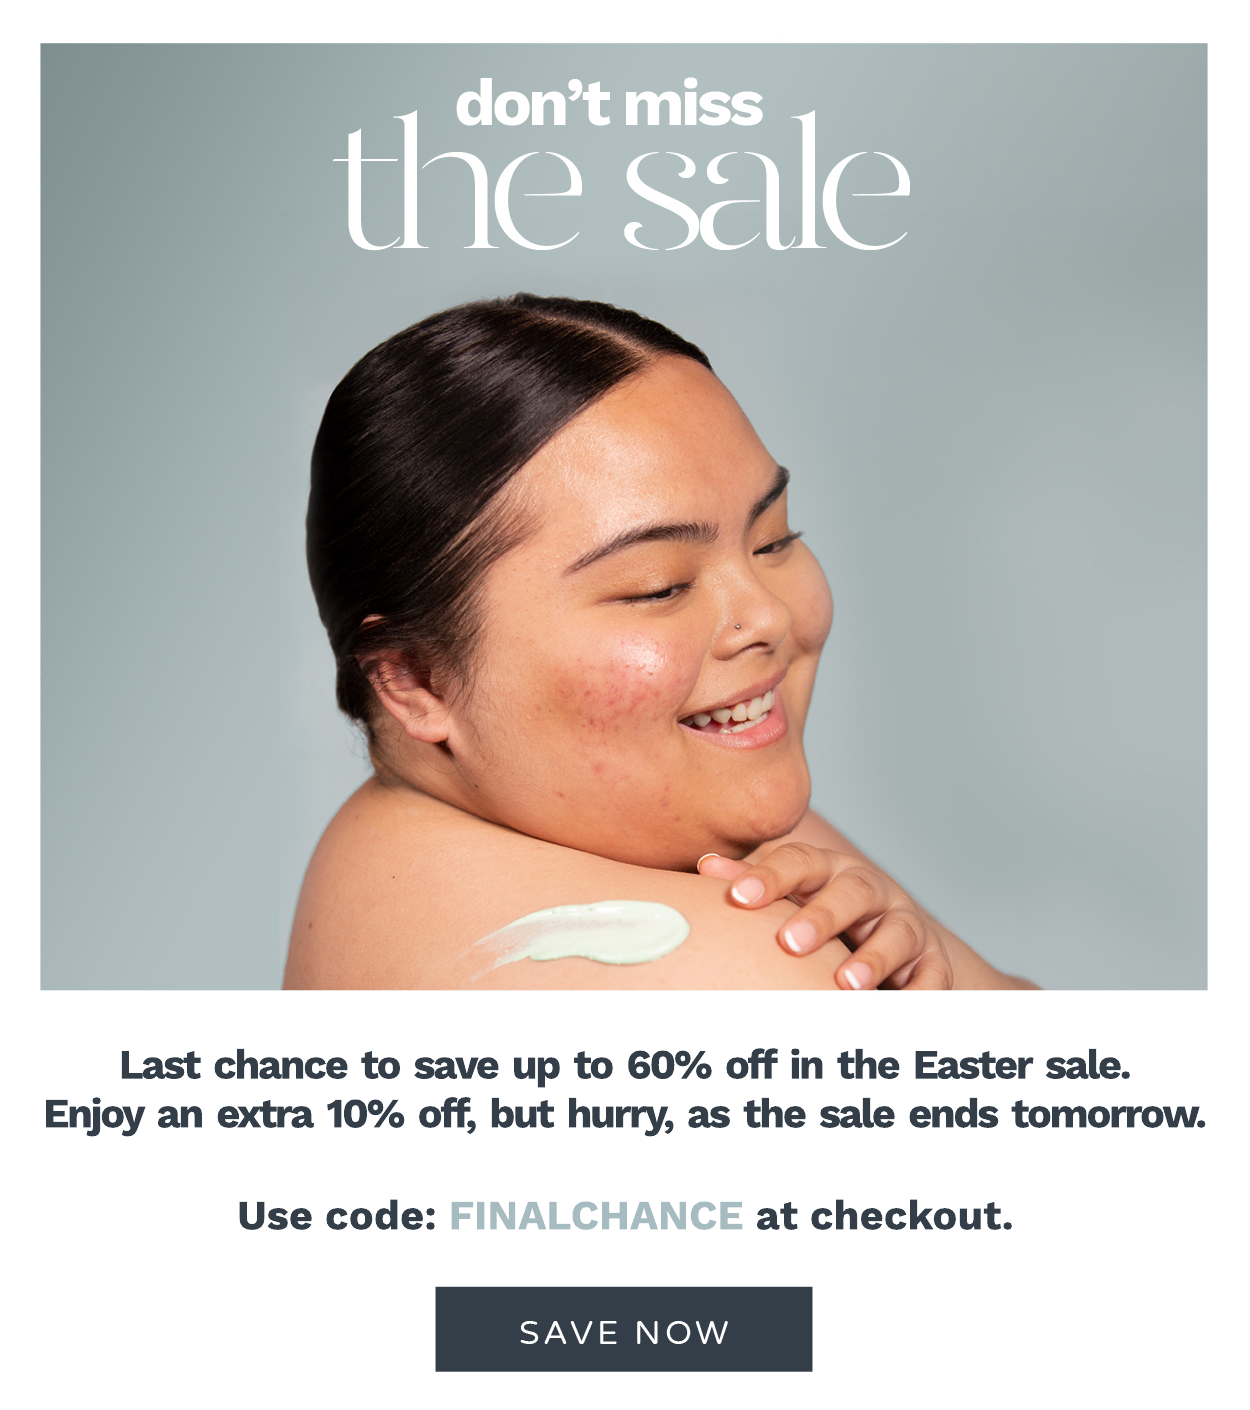 Get an extra 10% off the easter sale. Offer ends soon!